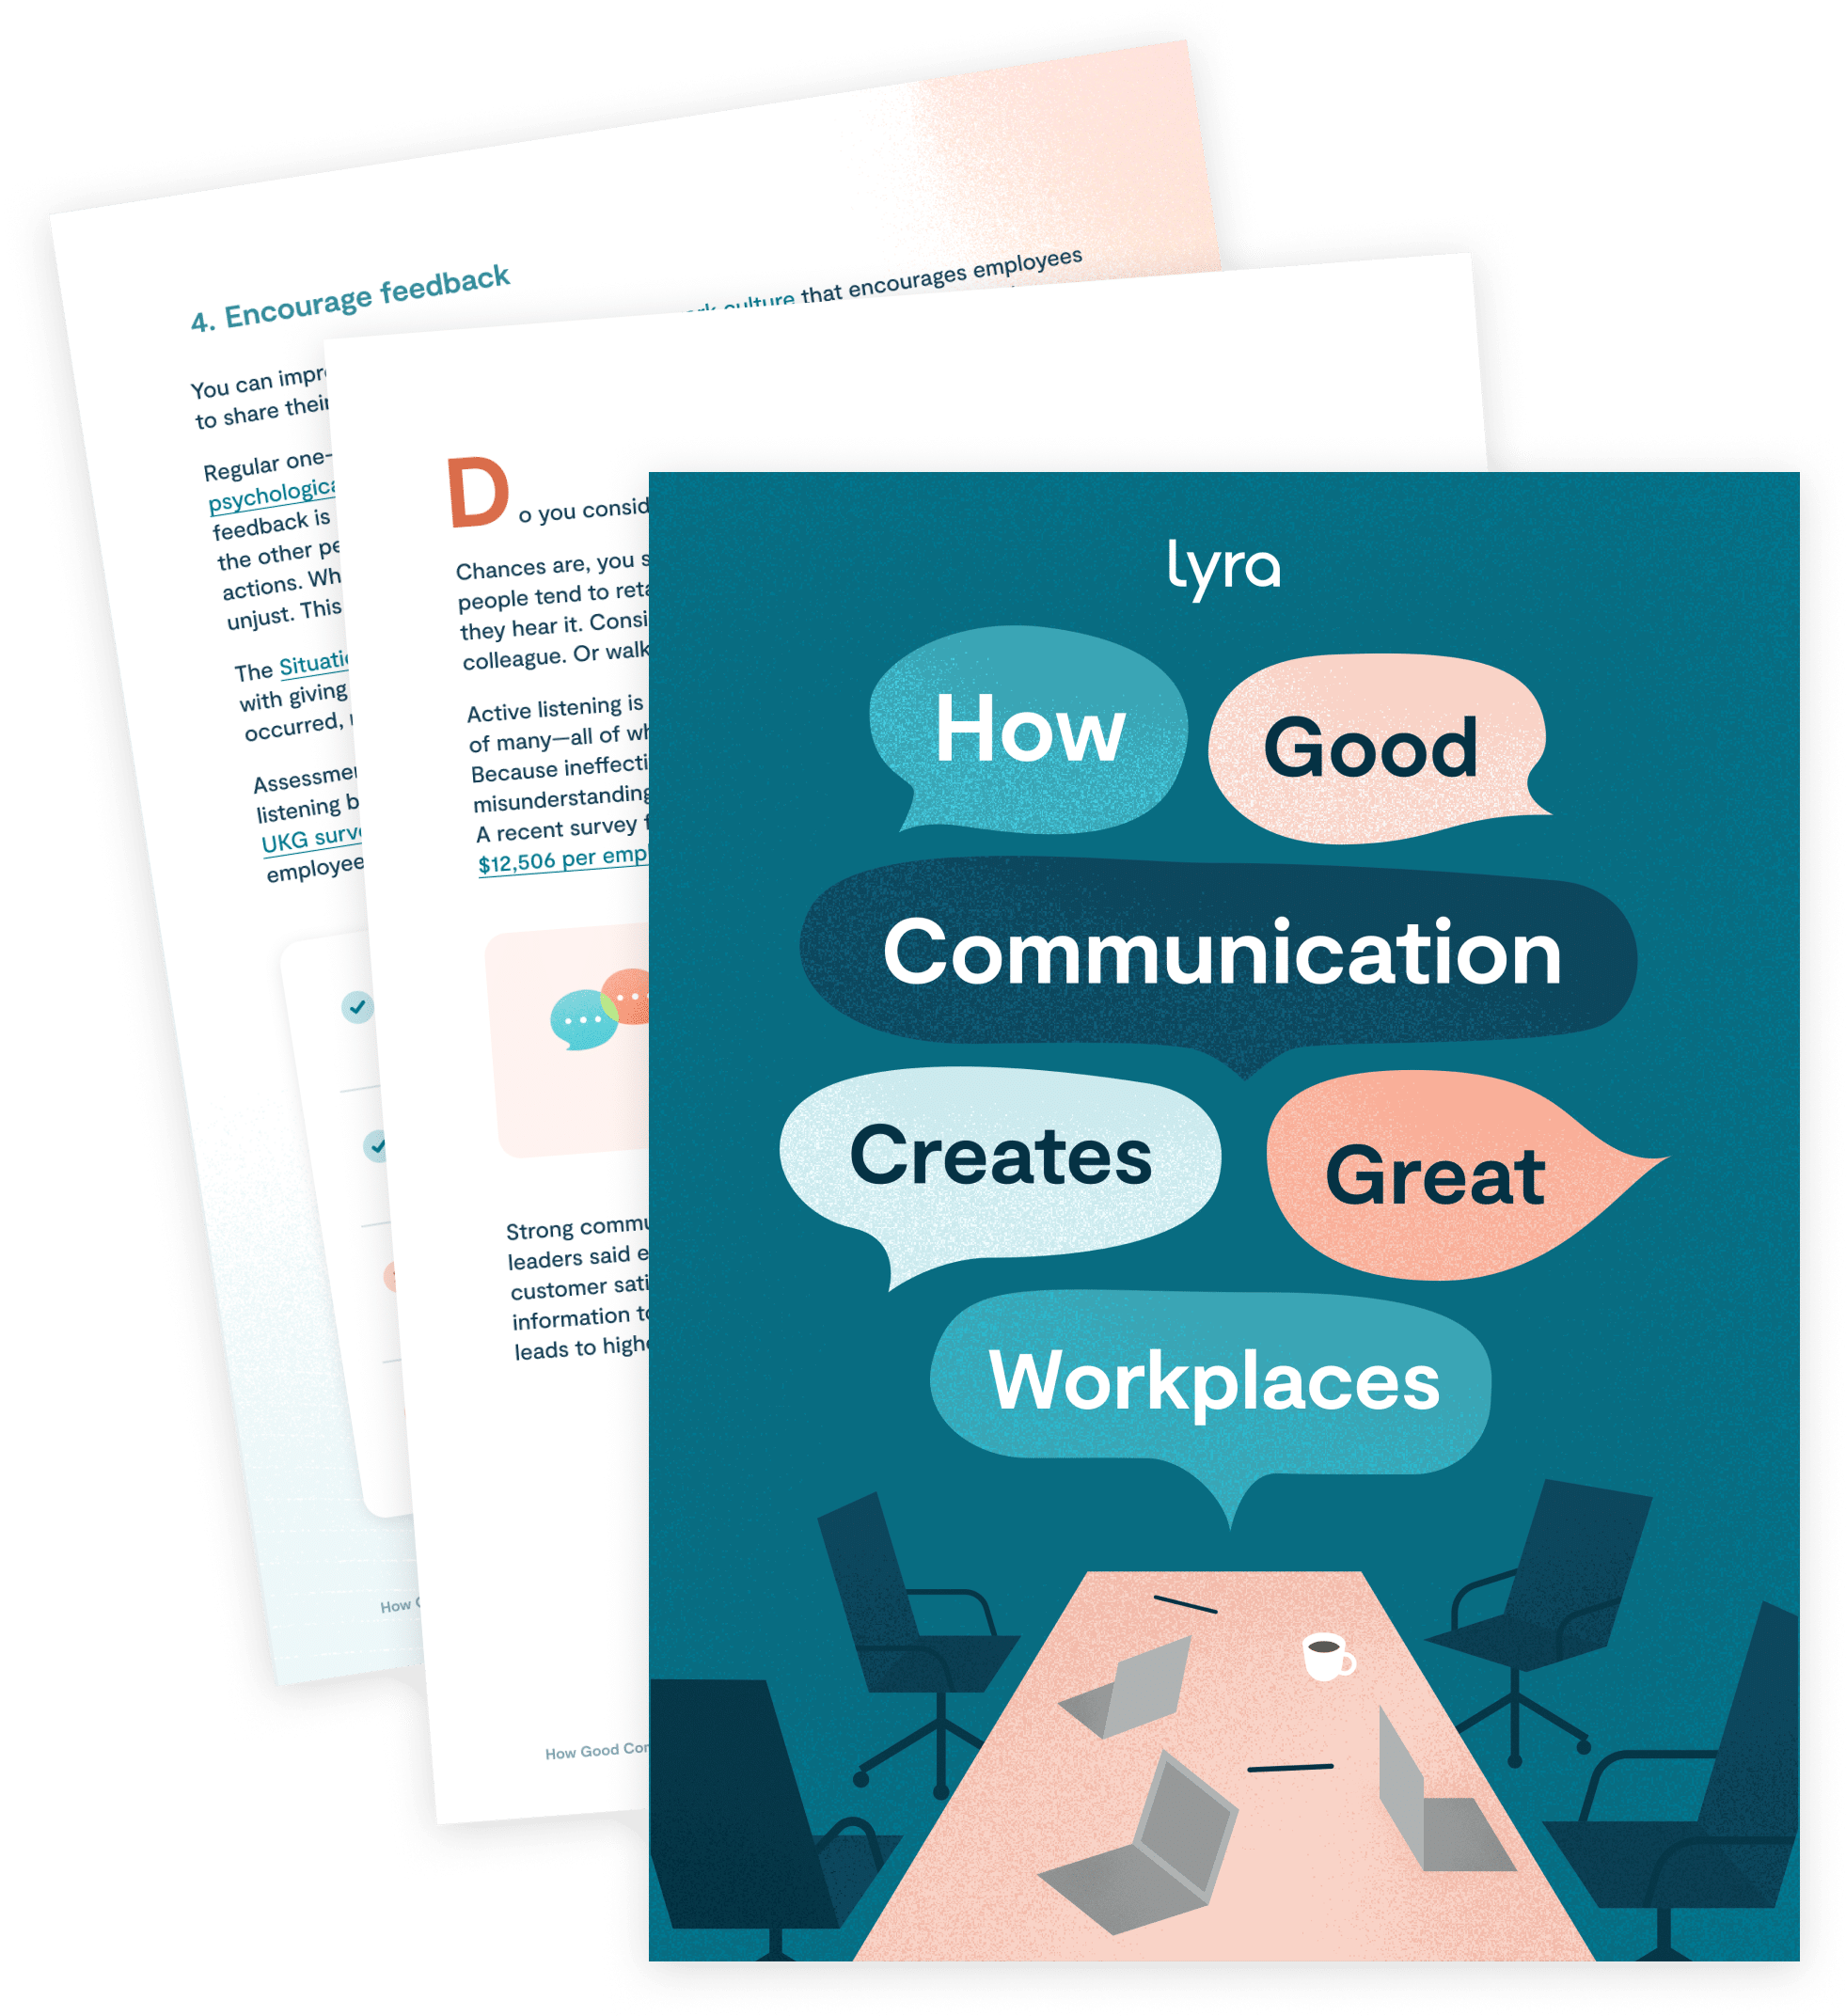 How-Good-Communication Creates Great Workplaces thumbnail